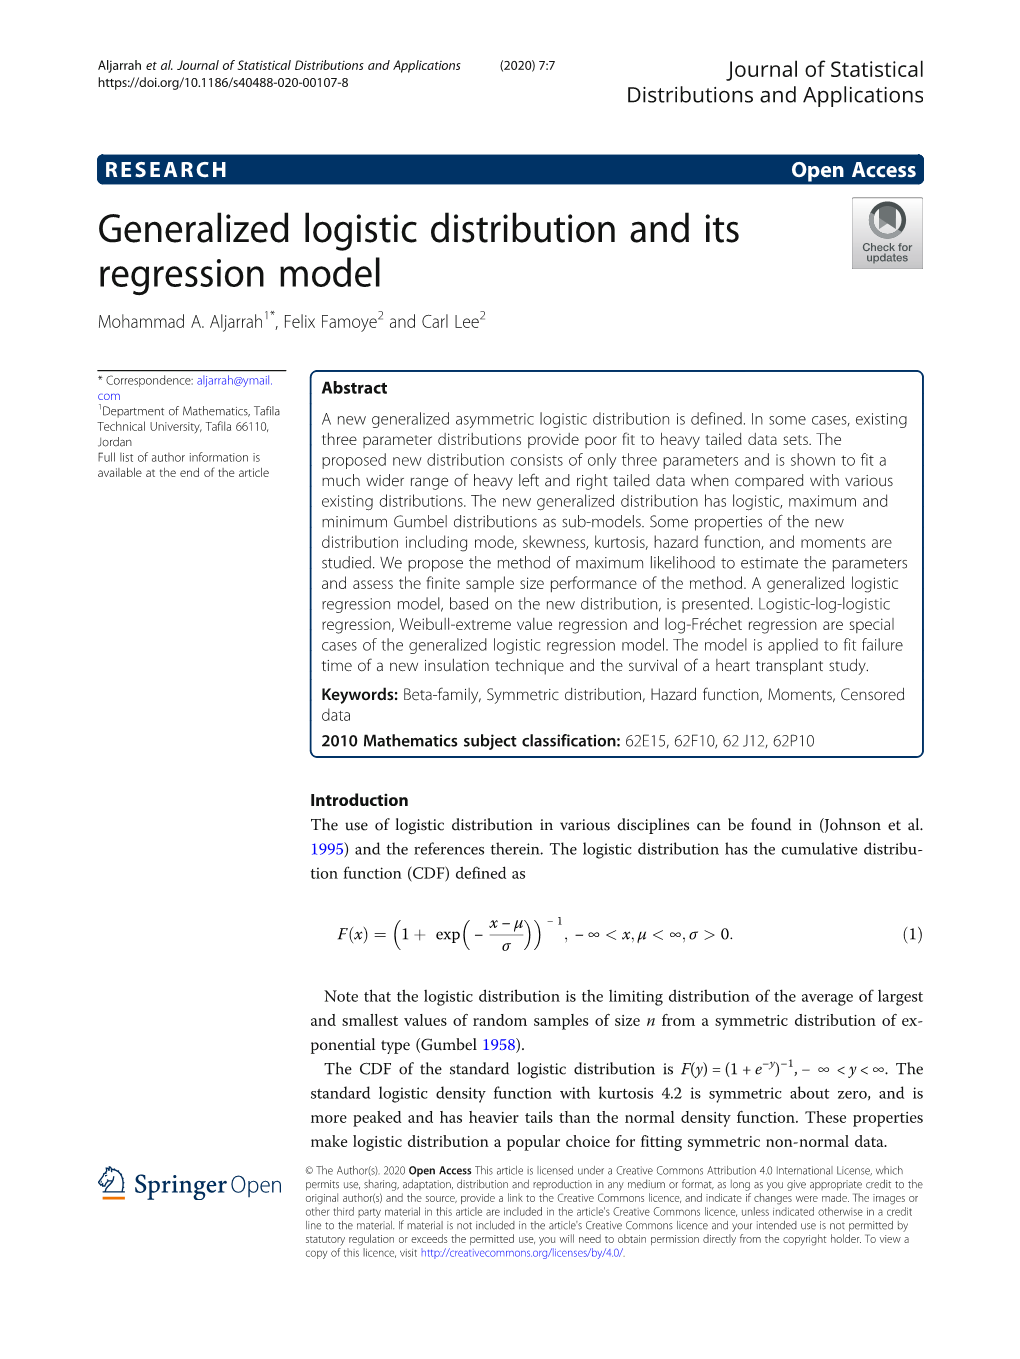 Generalized Logistic Distribution and Its Regression Model Mohammad A